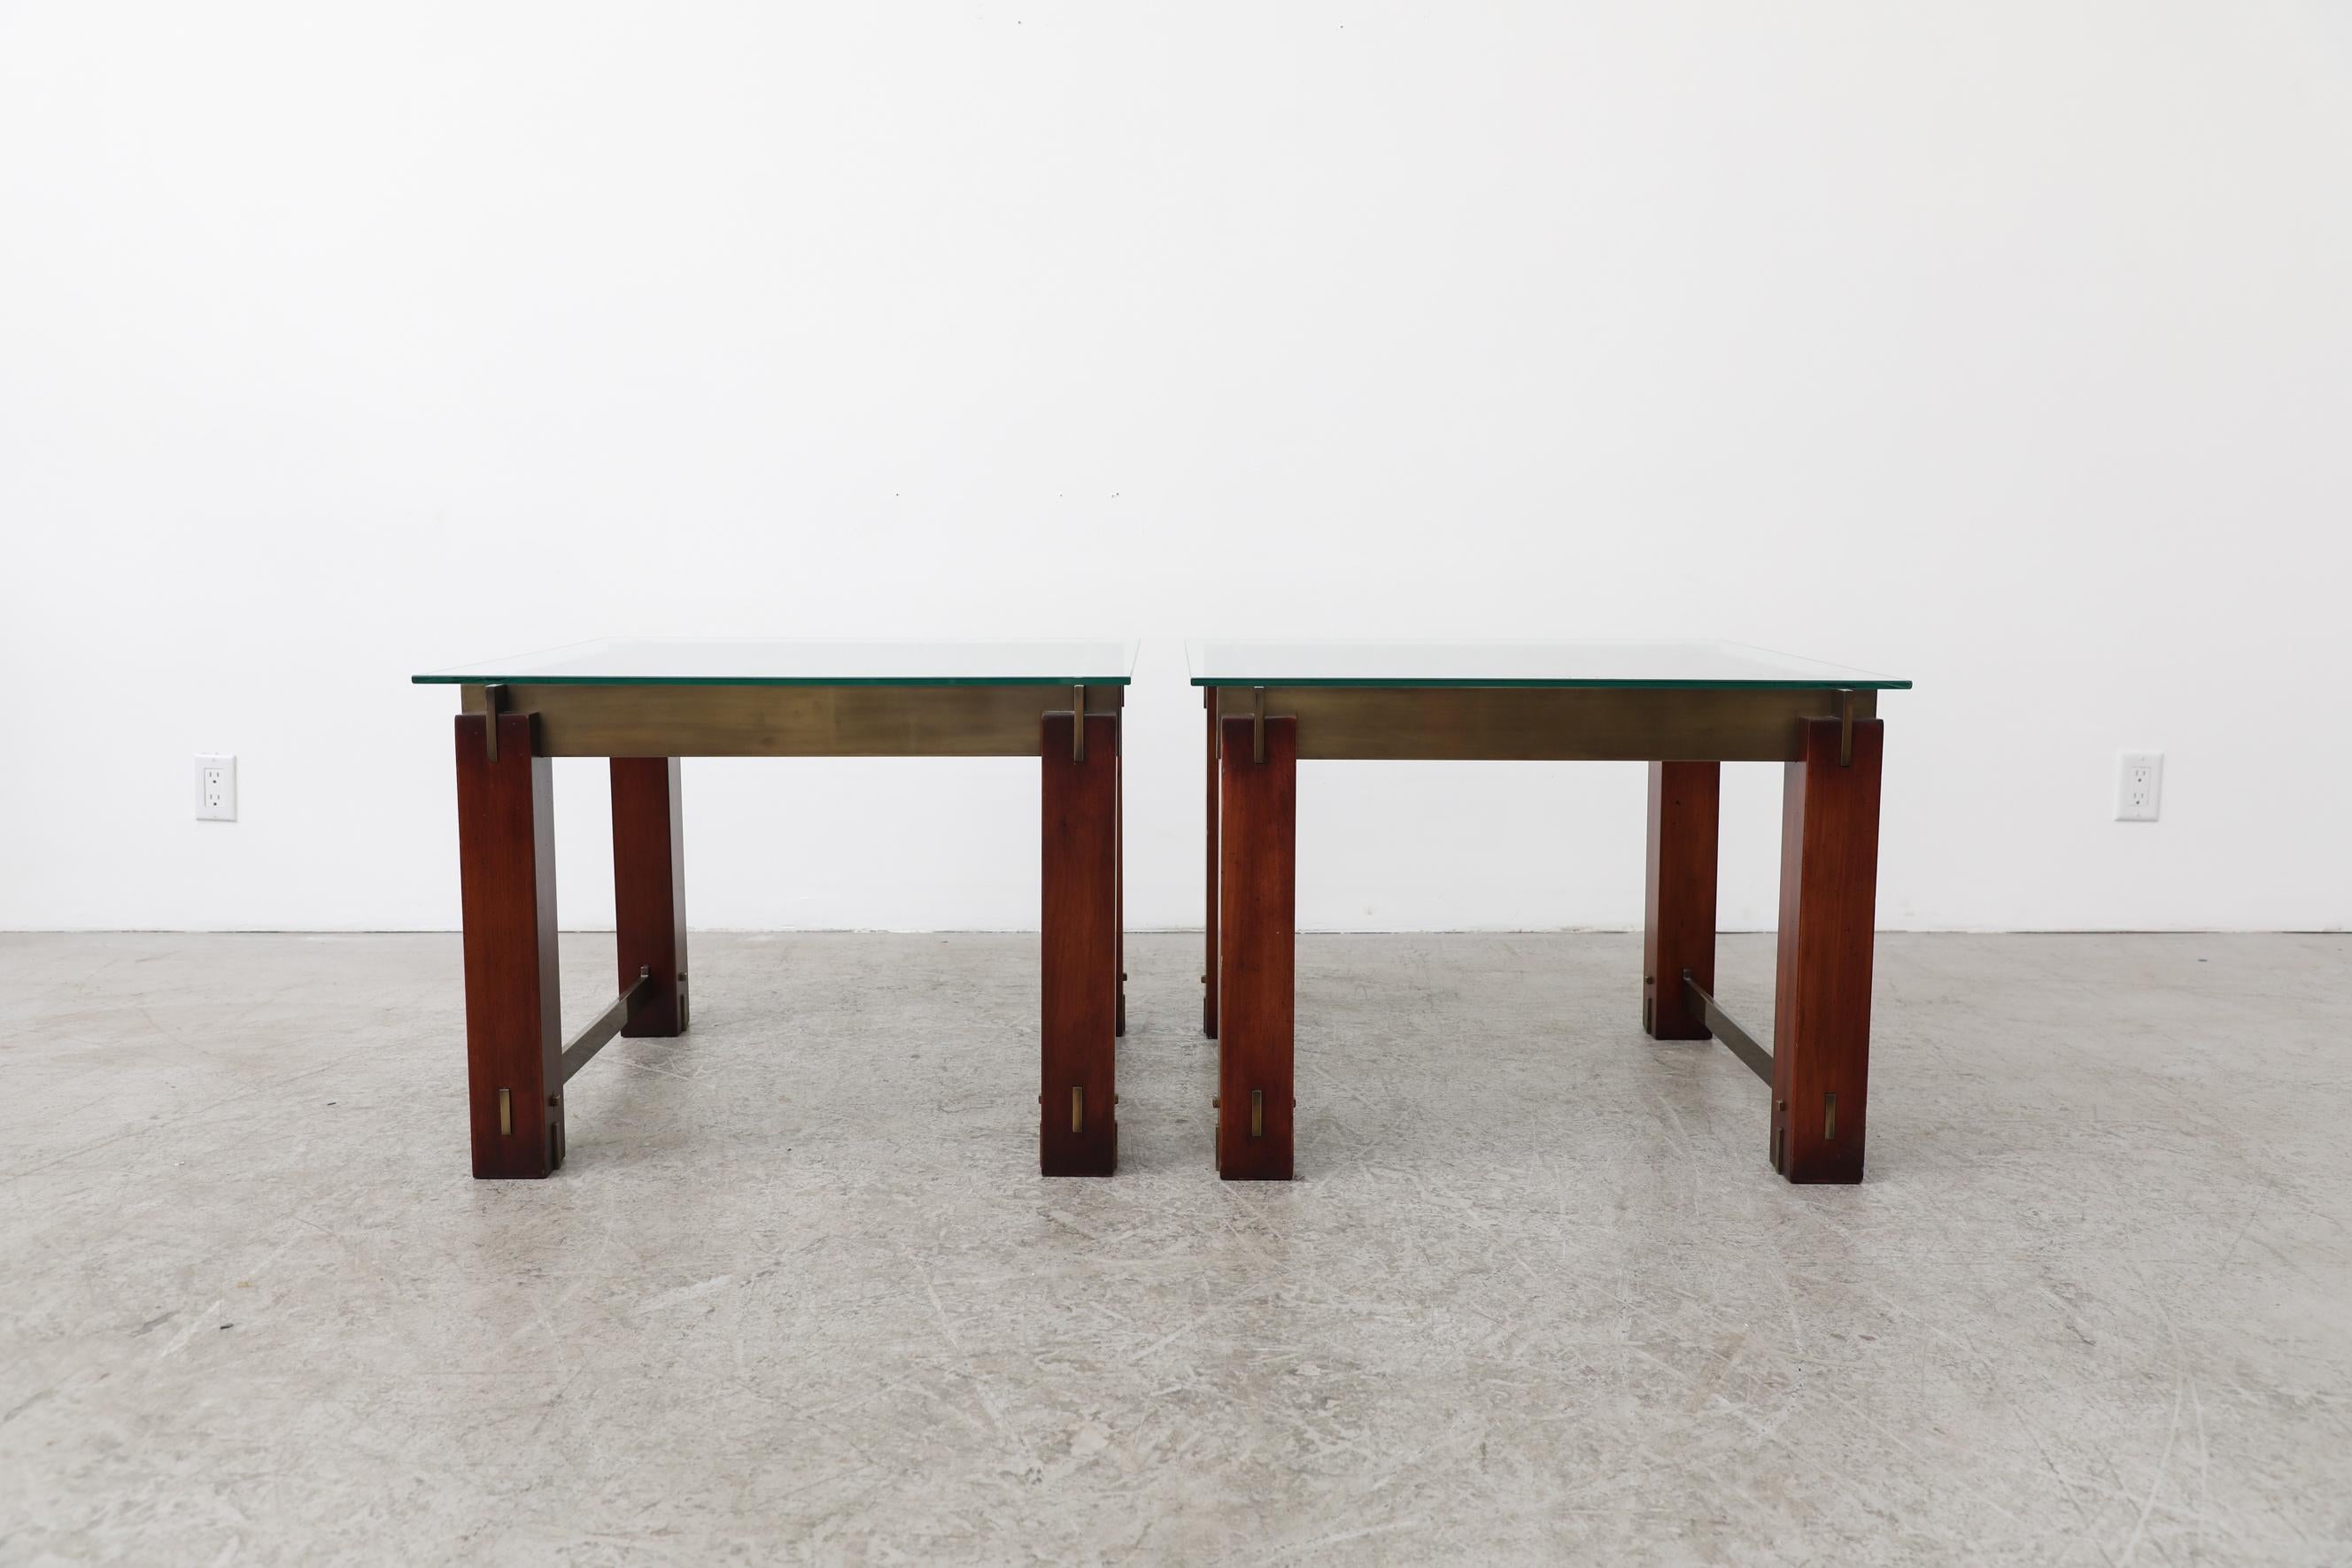 Pair of mid-century side tables inspired by the designs of Frank Lloyd Wright. The matching tables have deep red stain wood legs with handsomely inset brass brass hardware and new glass tops with beveled edges. Glass tops are 27.5